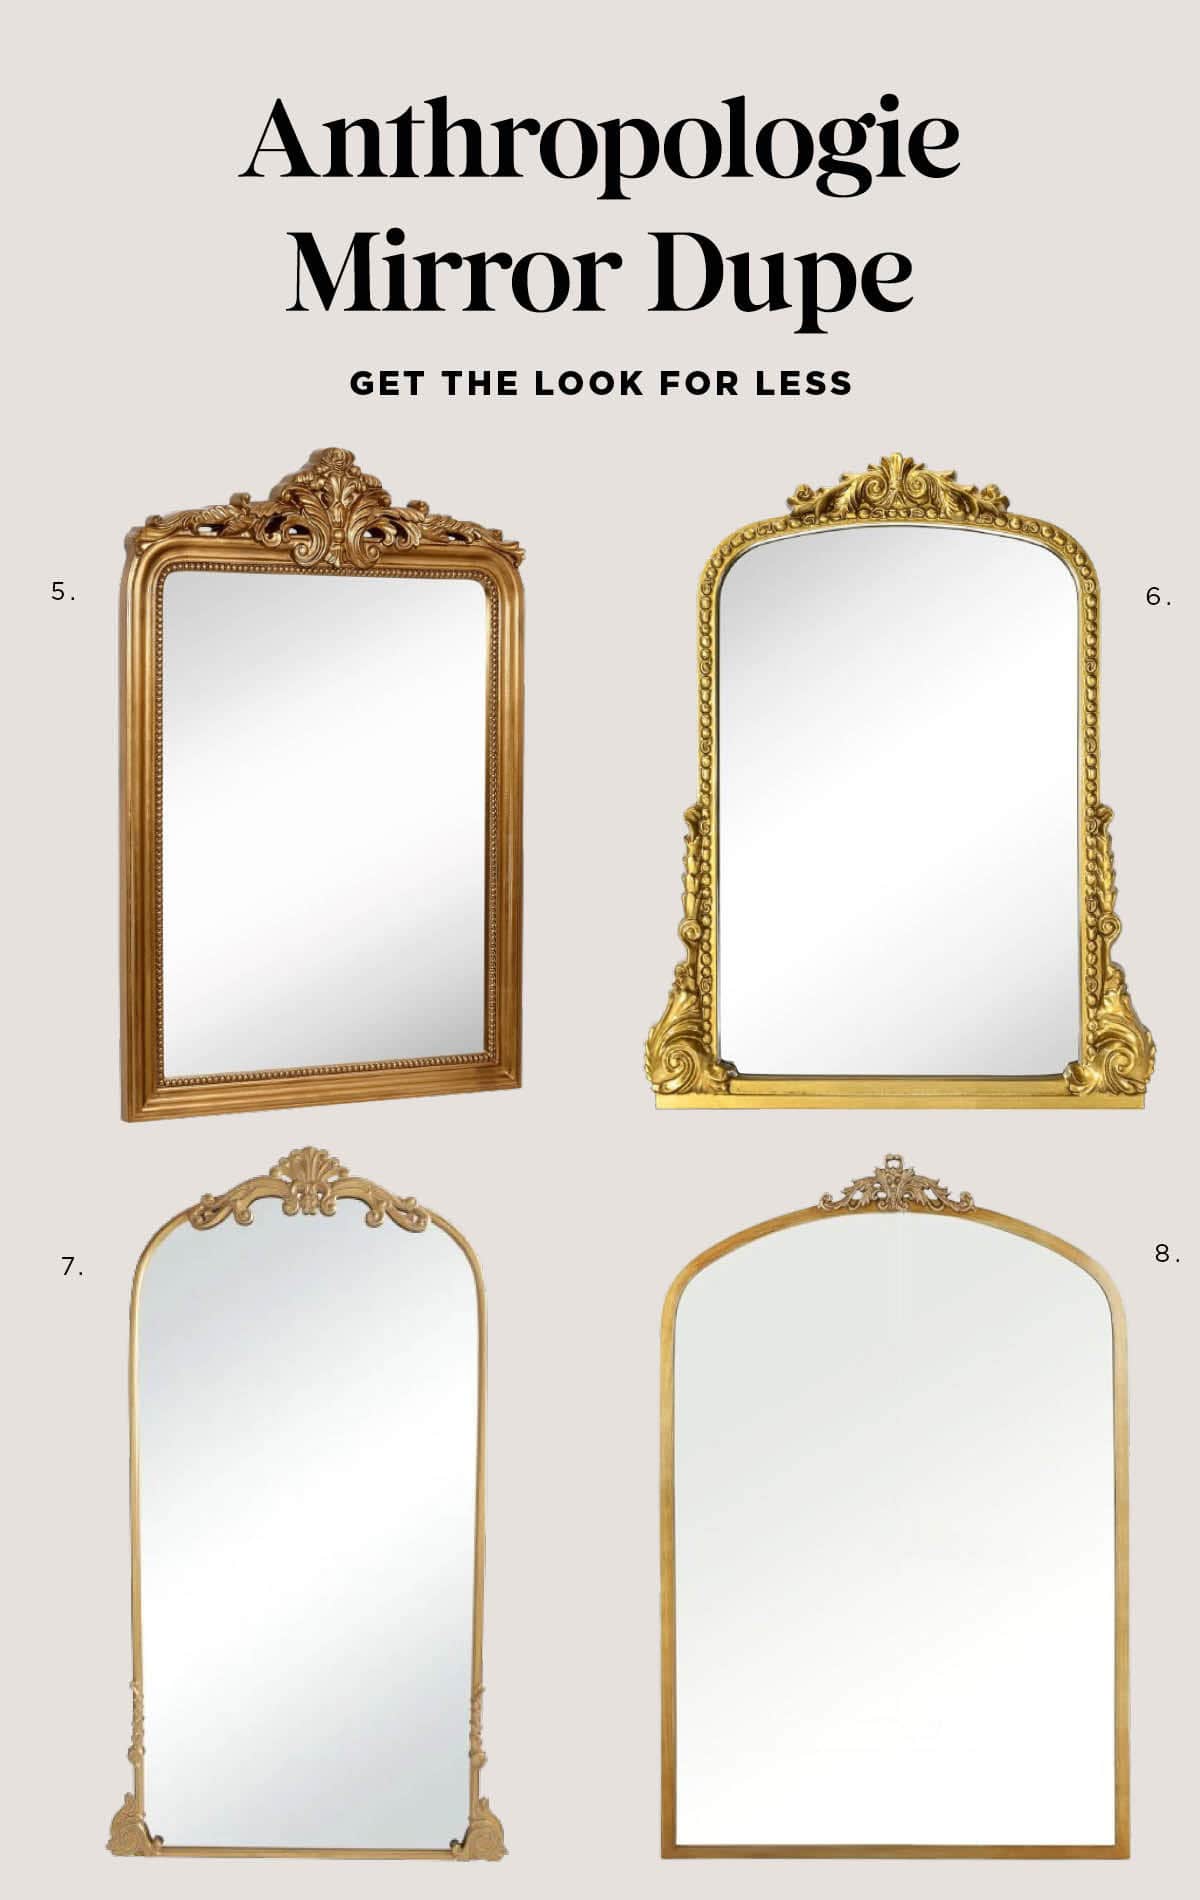 Anthropologie Mirror Dupe - If you have been looking for an Anthropologie mirror dupe for the gold Primrose mirror, then you must check out these vintage inspires mirror dupes!